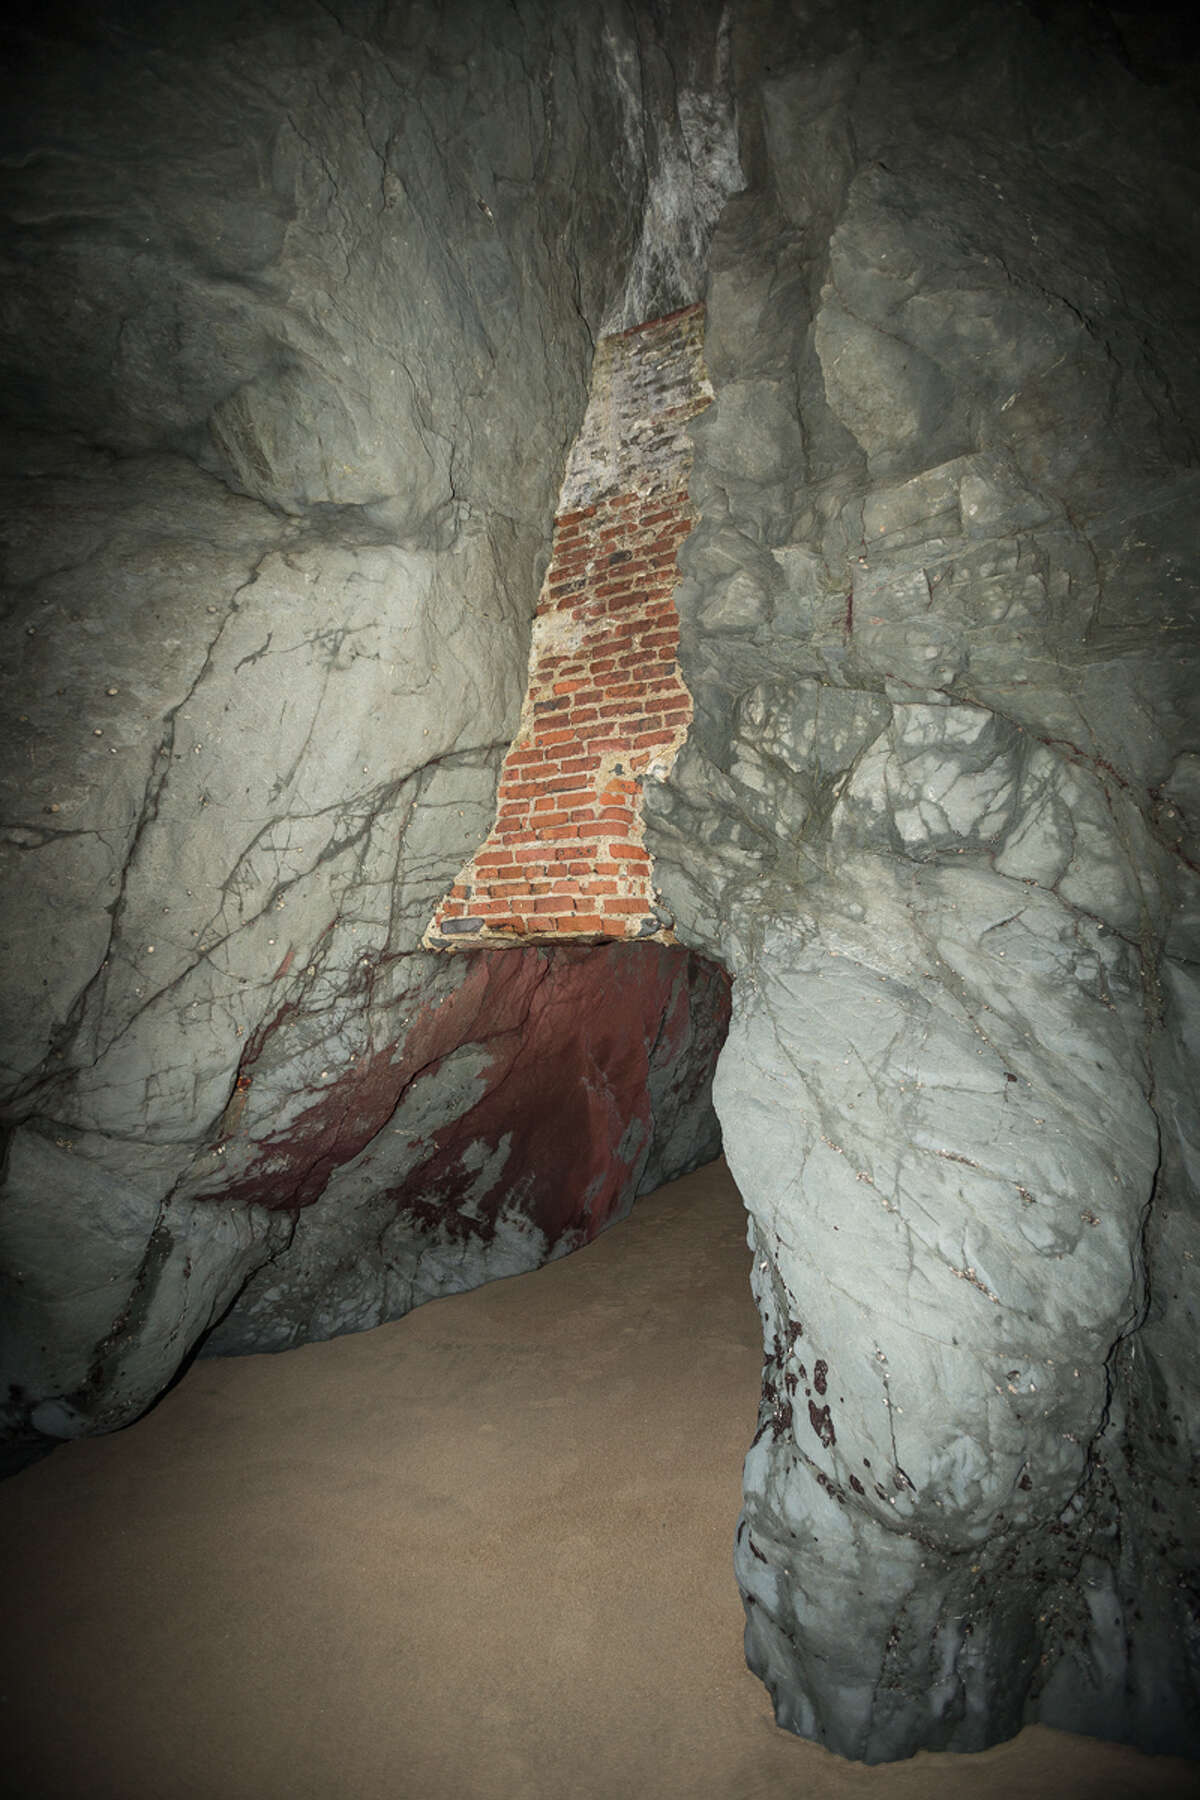 The only access point to the 250-foot-long mine tunnel is a sea cave with remnants of brick and iron infrastructure.